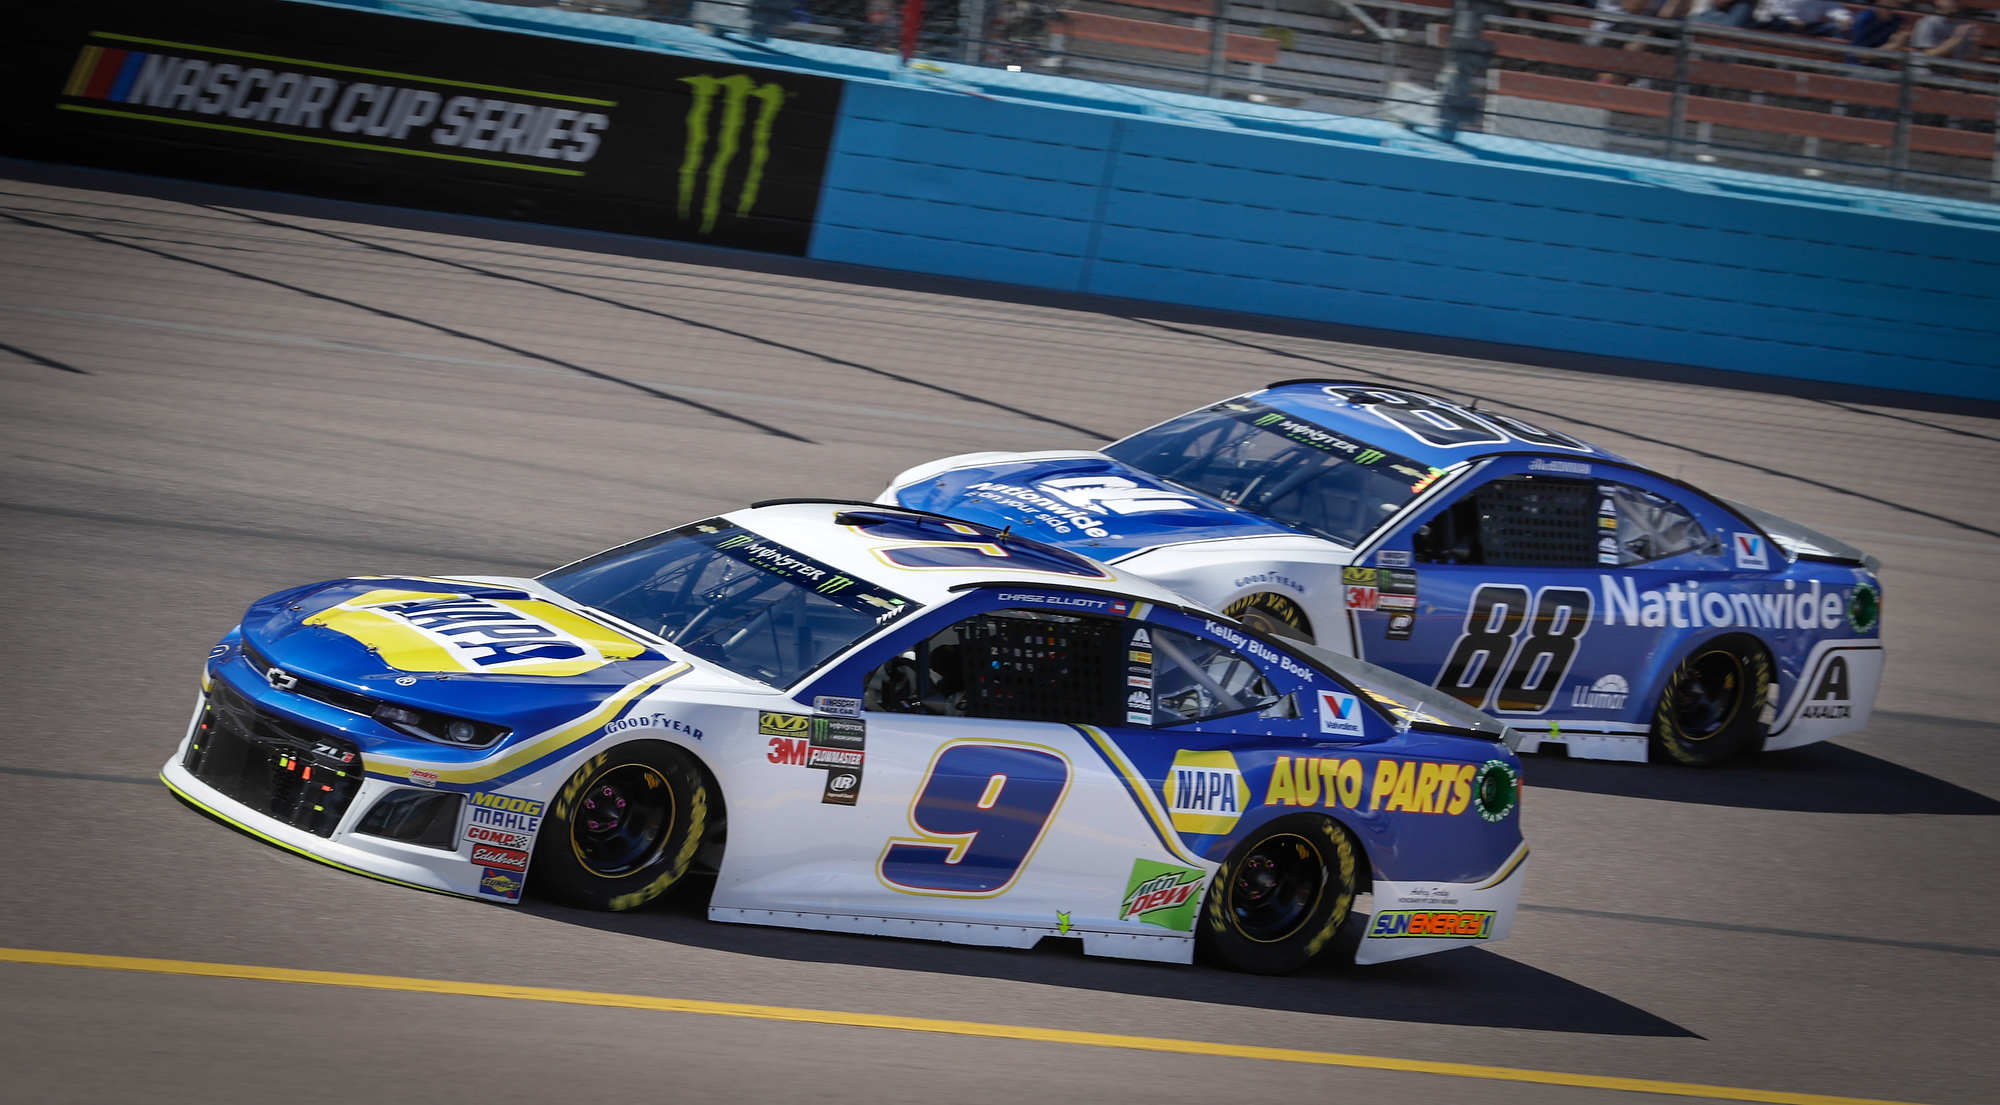 With the fix in for Ford this year the Chevy teams will not be given a chance to bend the rules to catch up. Elioot finished 3rd in Phoenix - too high up for NASCAR